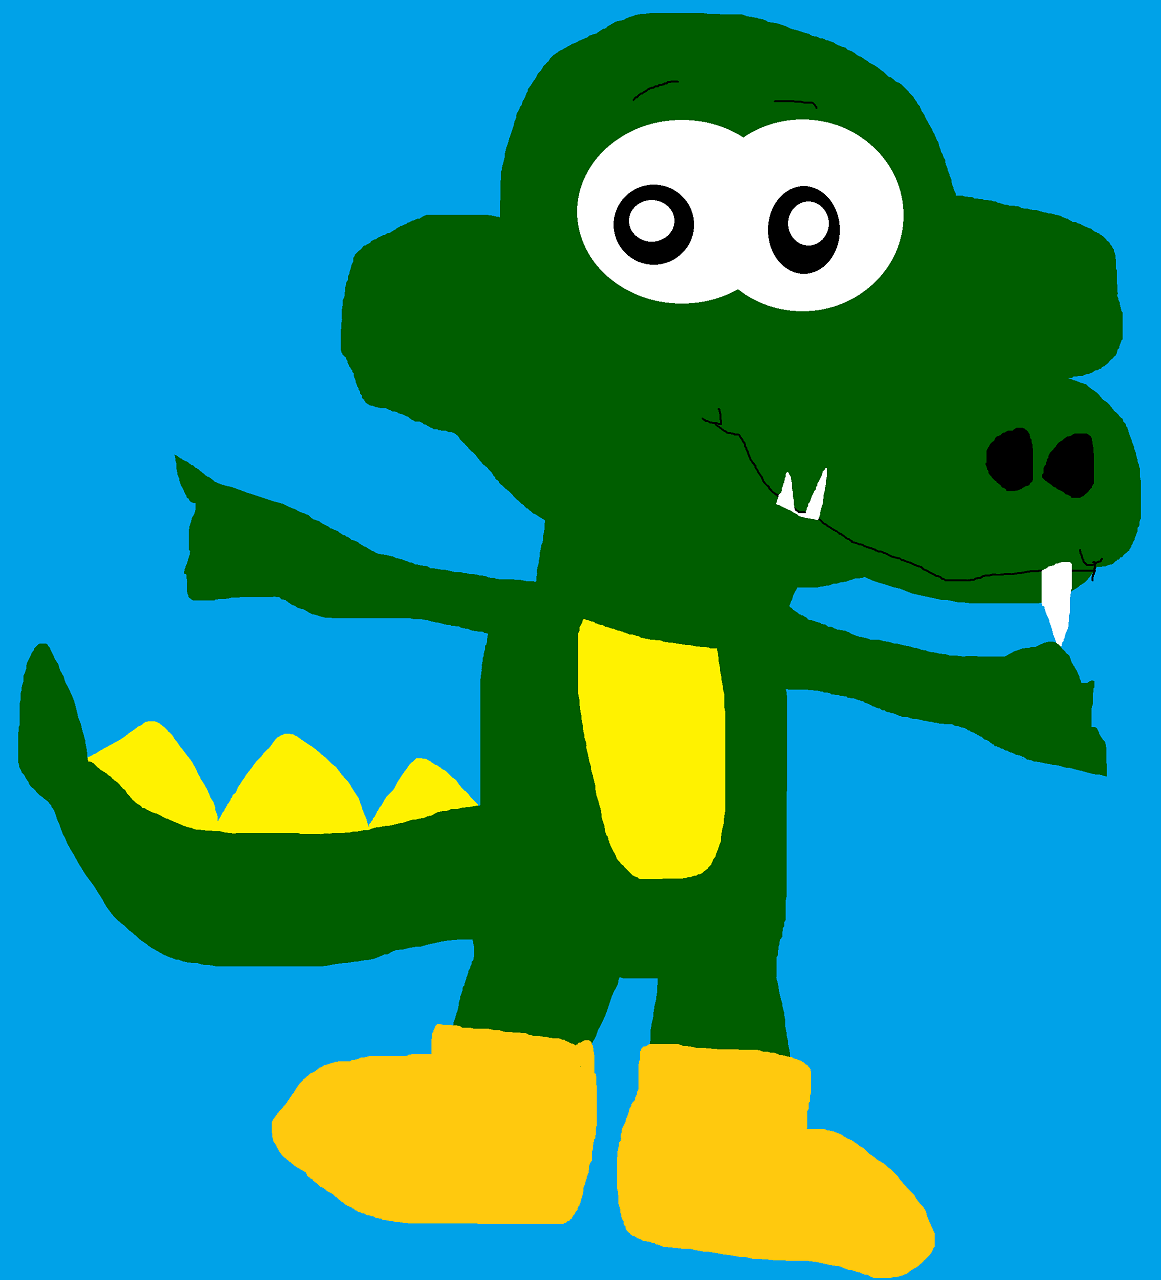 Cute Gator Based On Roy Rogers Kids Meal Gatortales Toy From 1989 by Falconlobo